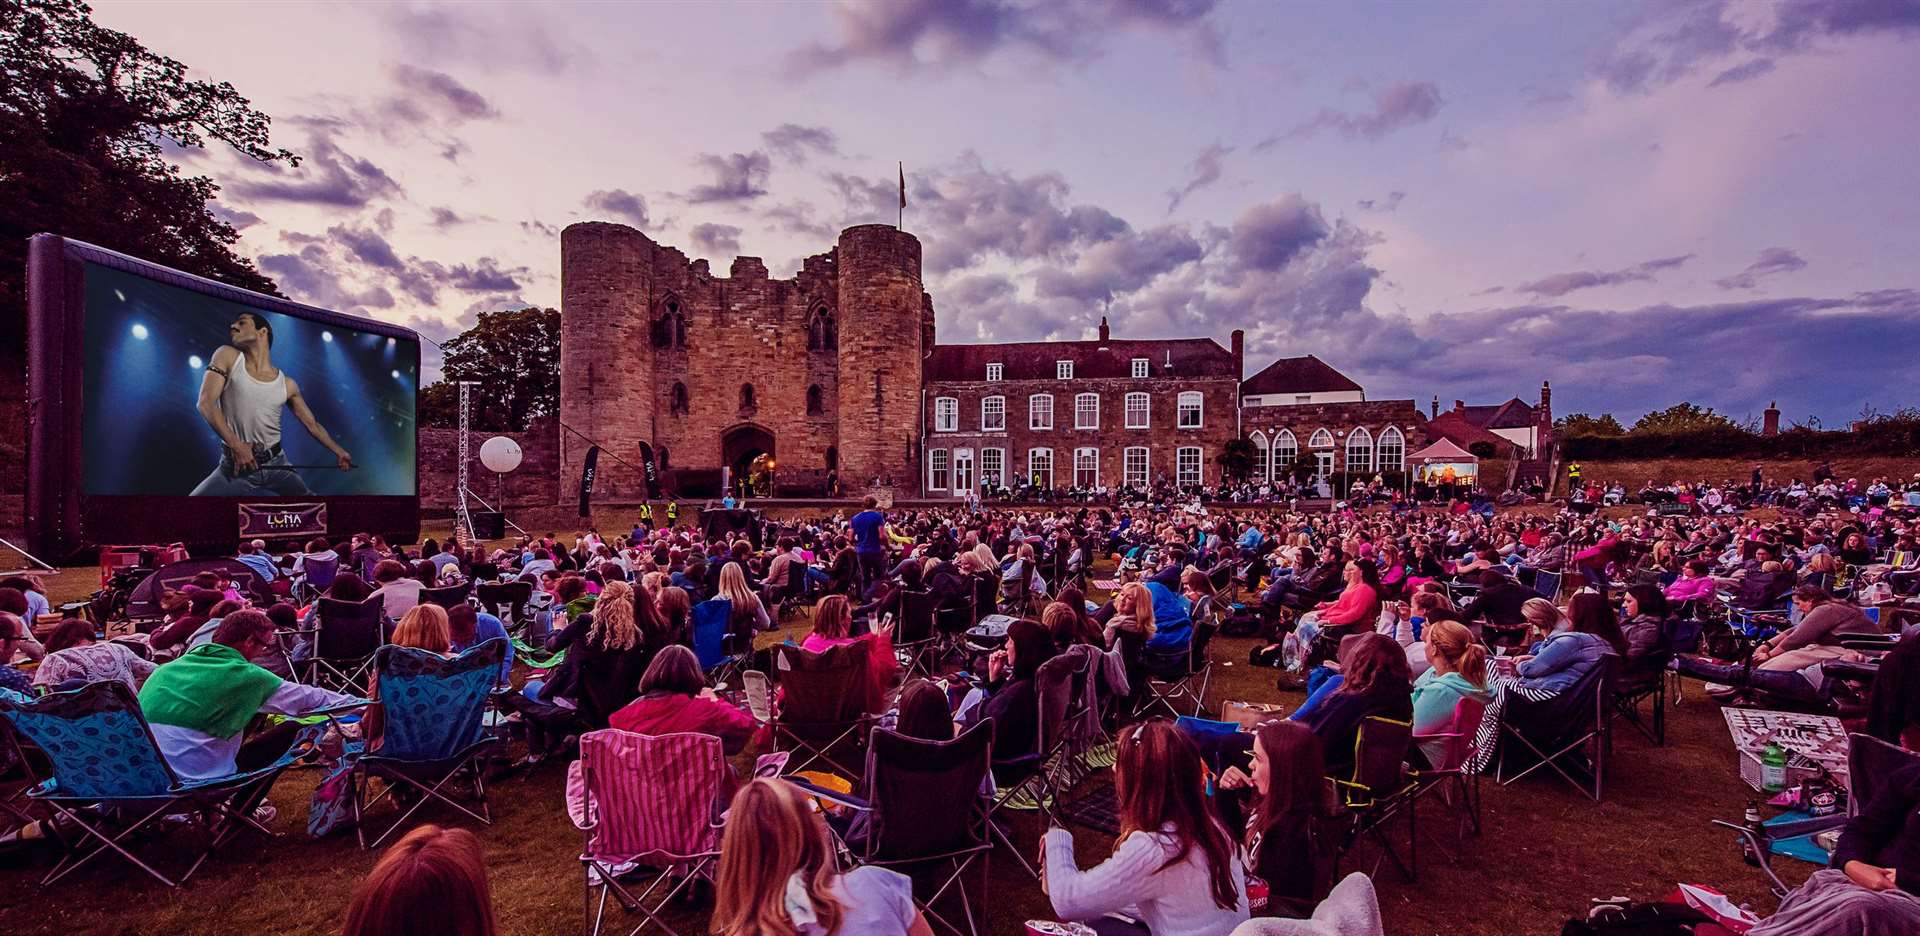 Bohemian Rhapsody is one of three films to feature in Tonbridge Castle's open air cinema this summer (7839186)